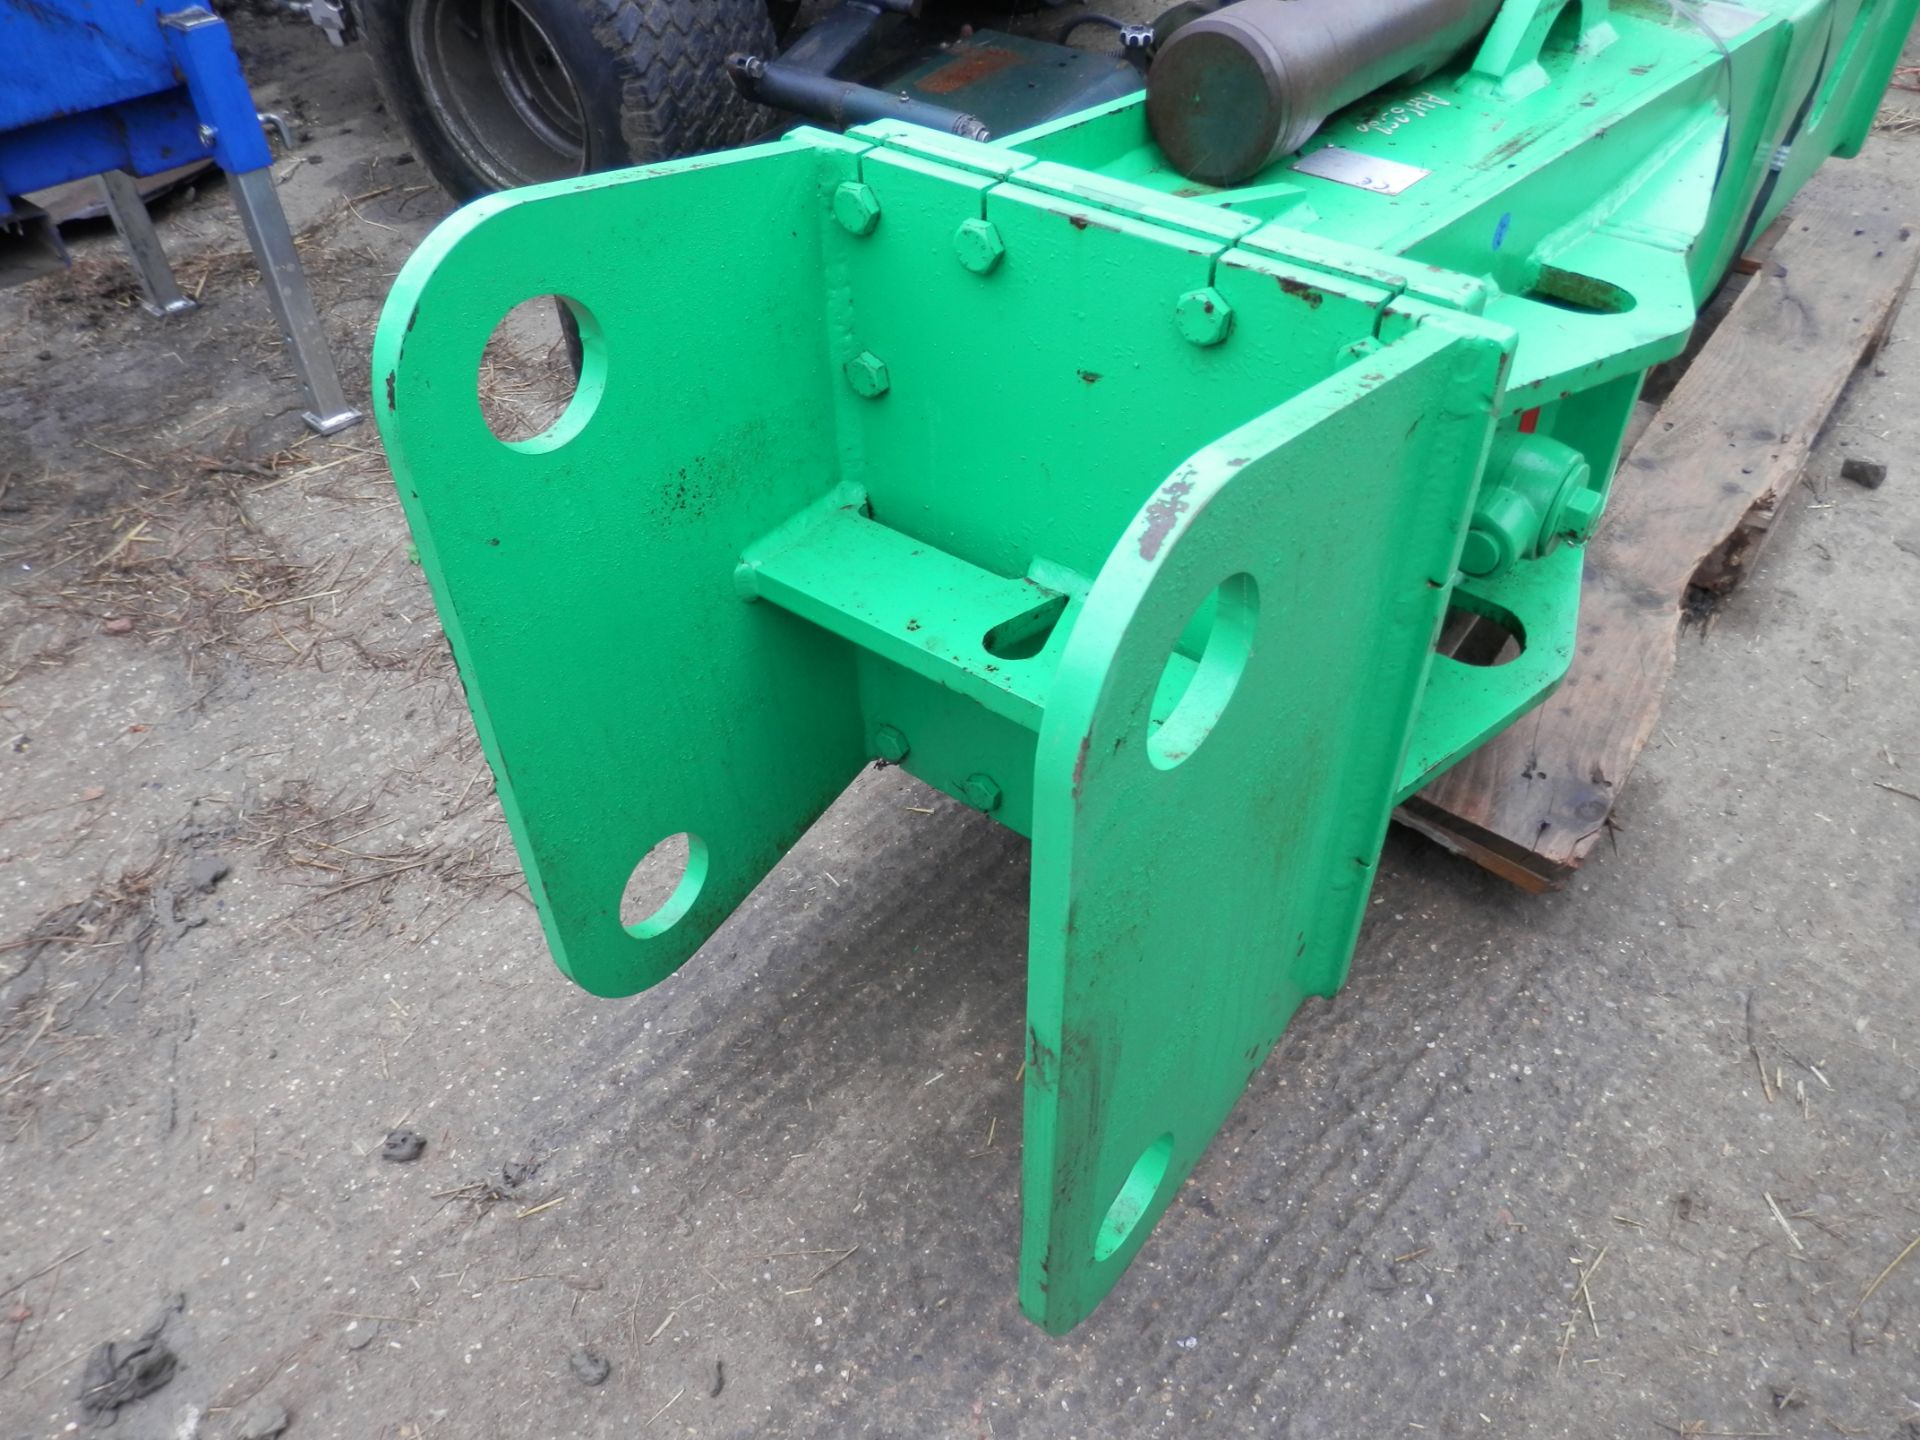 NEW 2016 BREAKER ATTACHMENT FOR DIGGER, MODEL BRH501SIL, COST £15000 NEW - Image 3 of 6